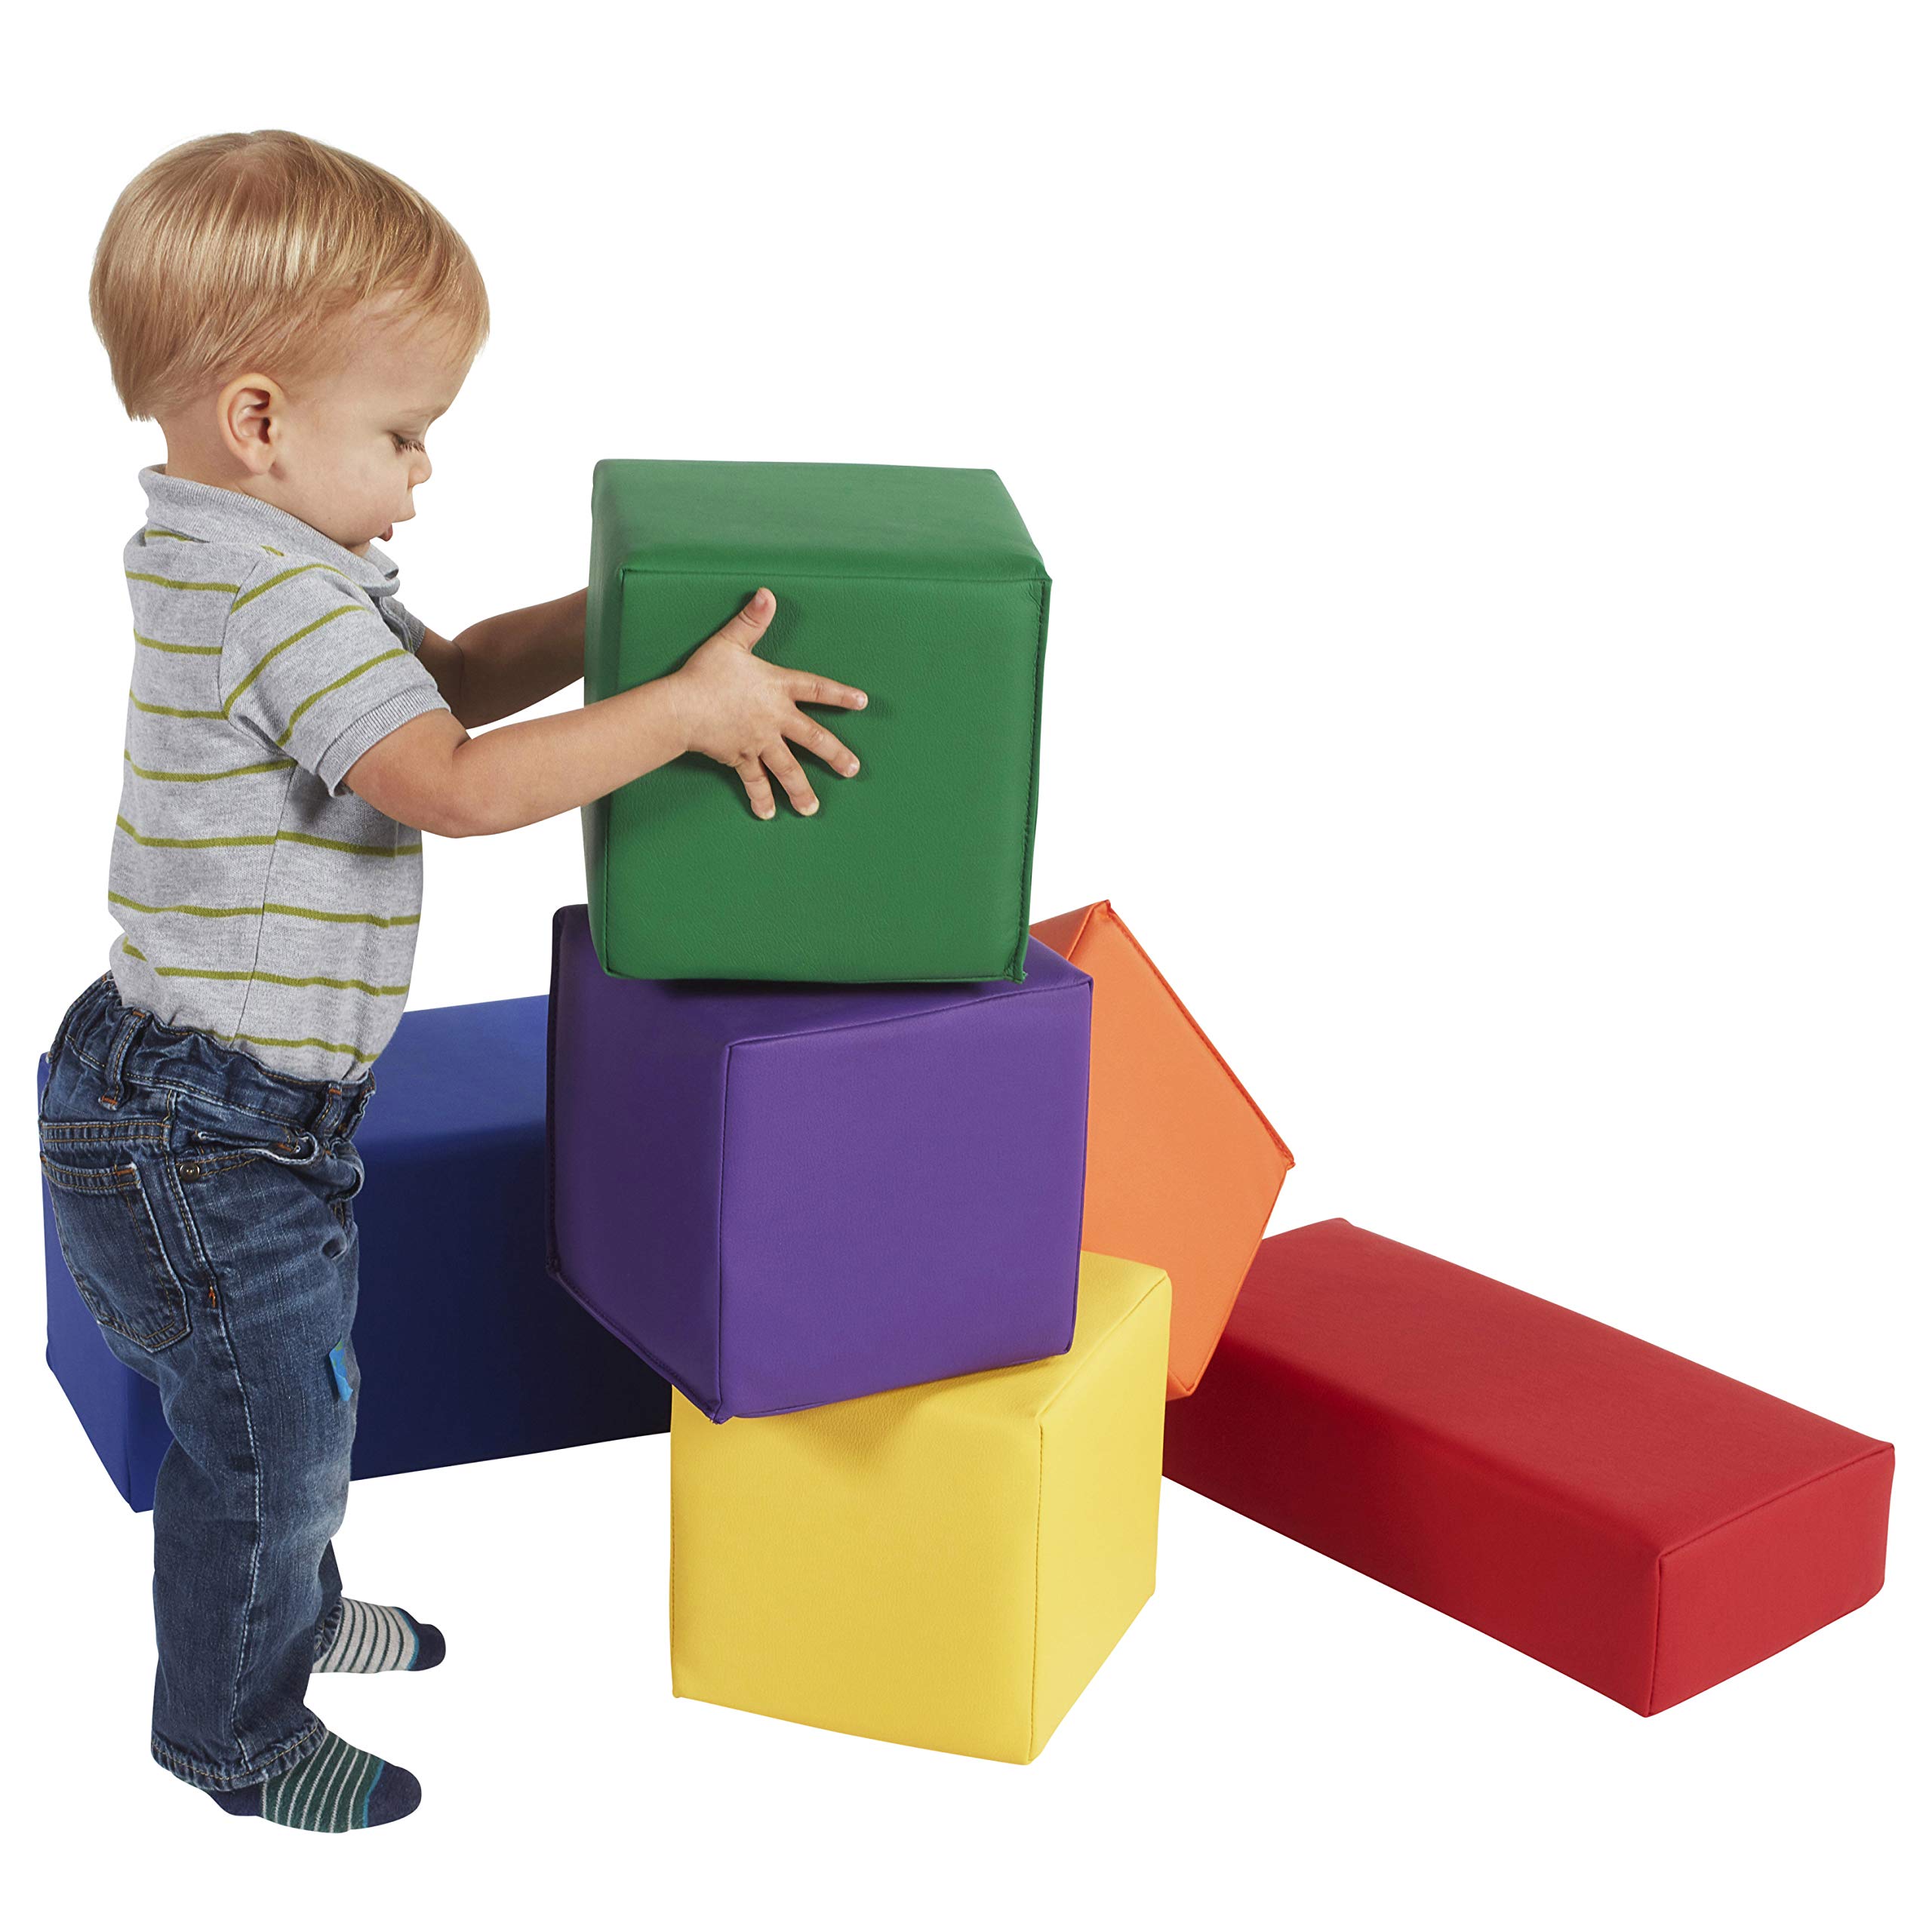 Factory Direct Partners 12364-CTPU SoftScape Playtime and Climb Multipurpose Playset for Infants & 10414-AS SoftScape Stack-a-Block Big Foam Construction Building Blocks